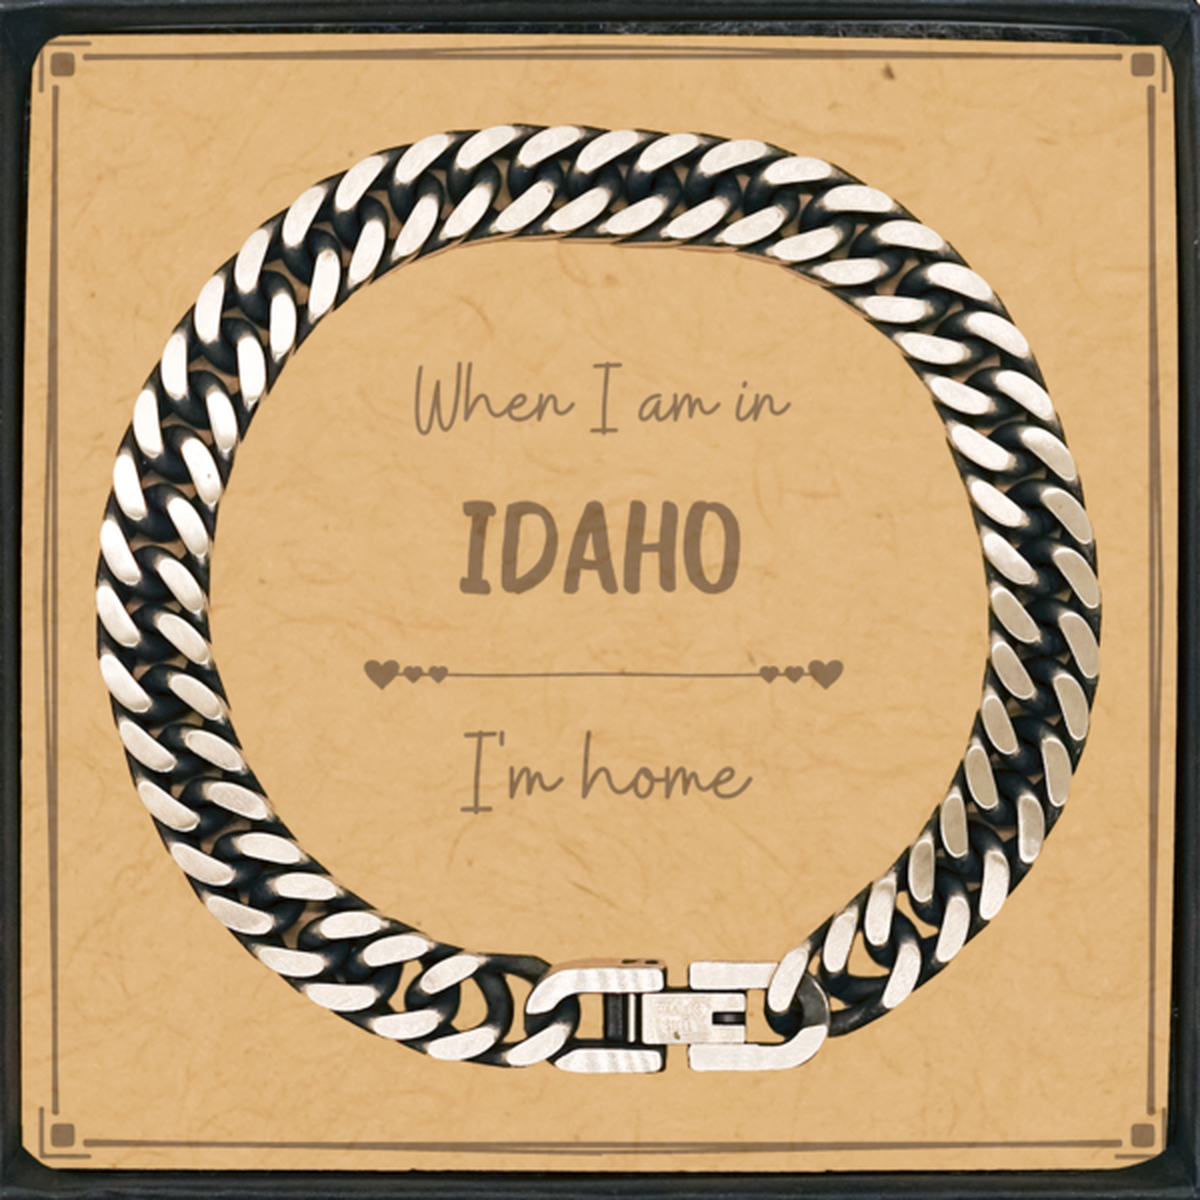 When I am in Idaho I'm home Cuban Link Chain Bracelet, Message Card Gifts For Idaho, State Idaho Birthday Gifts for Friends Coworker